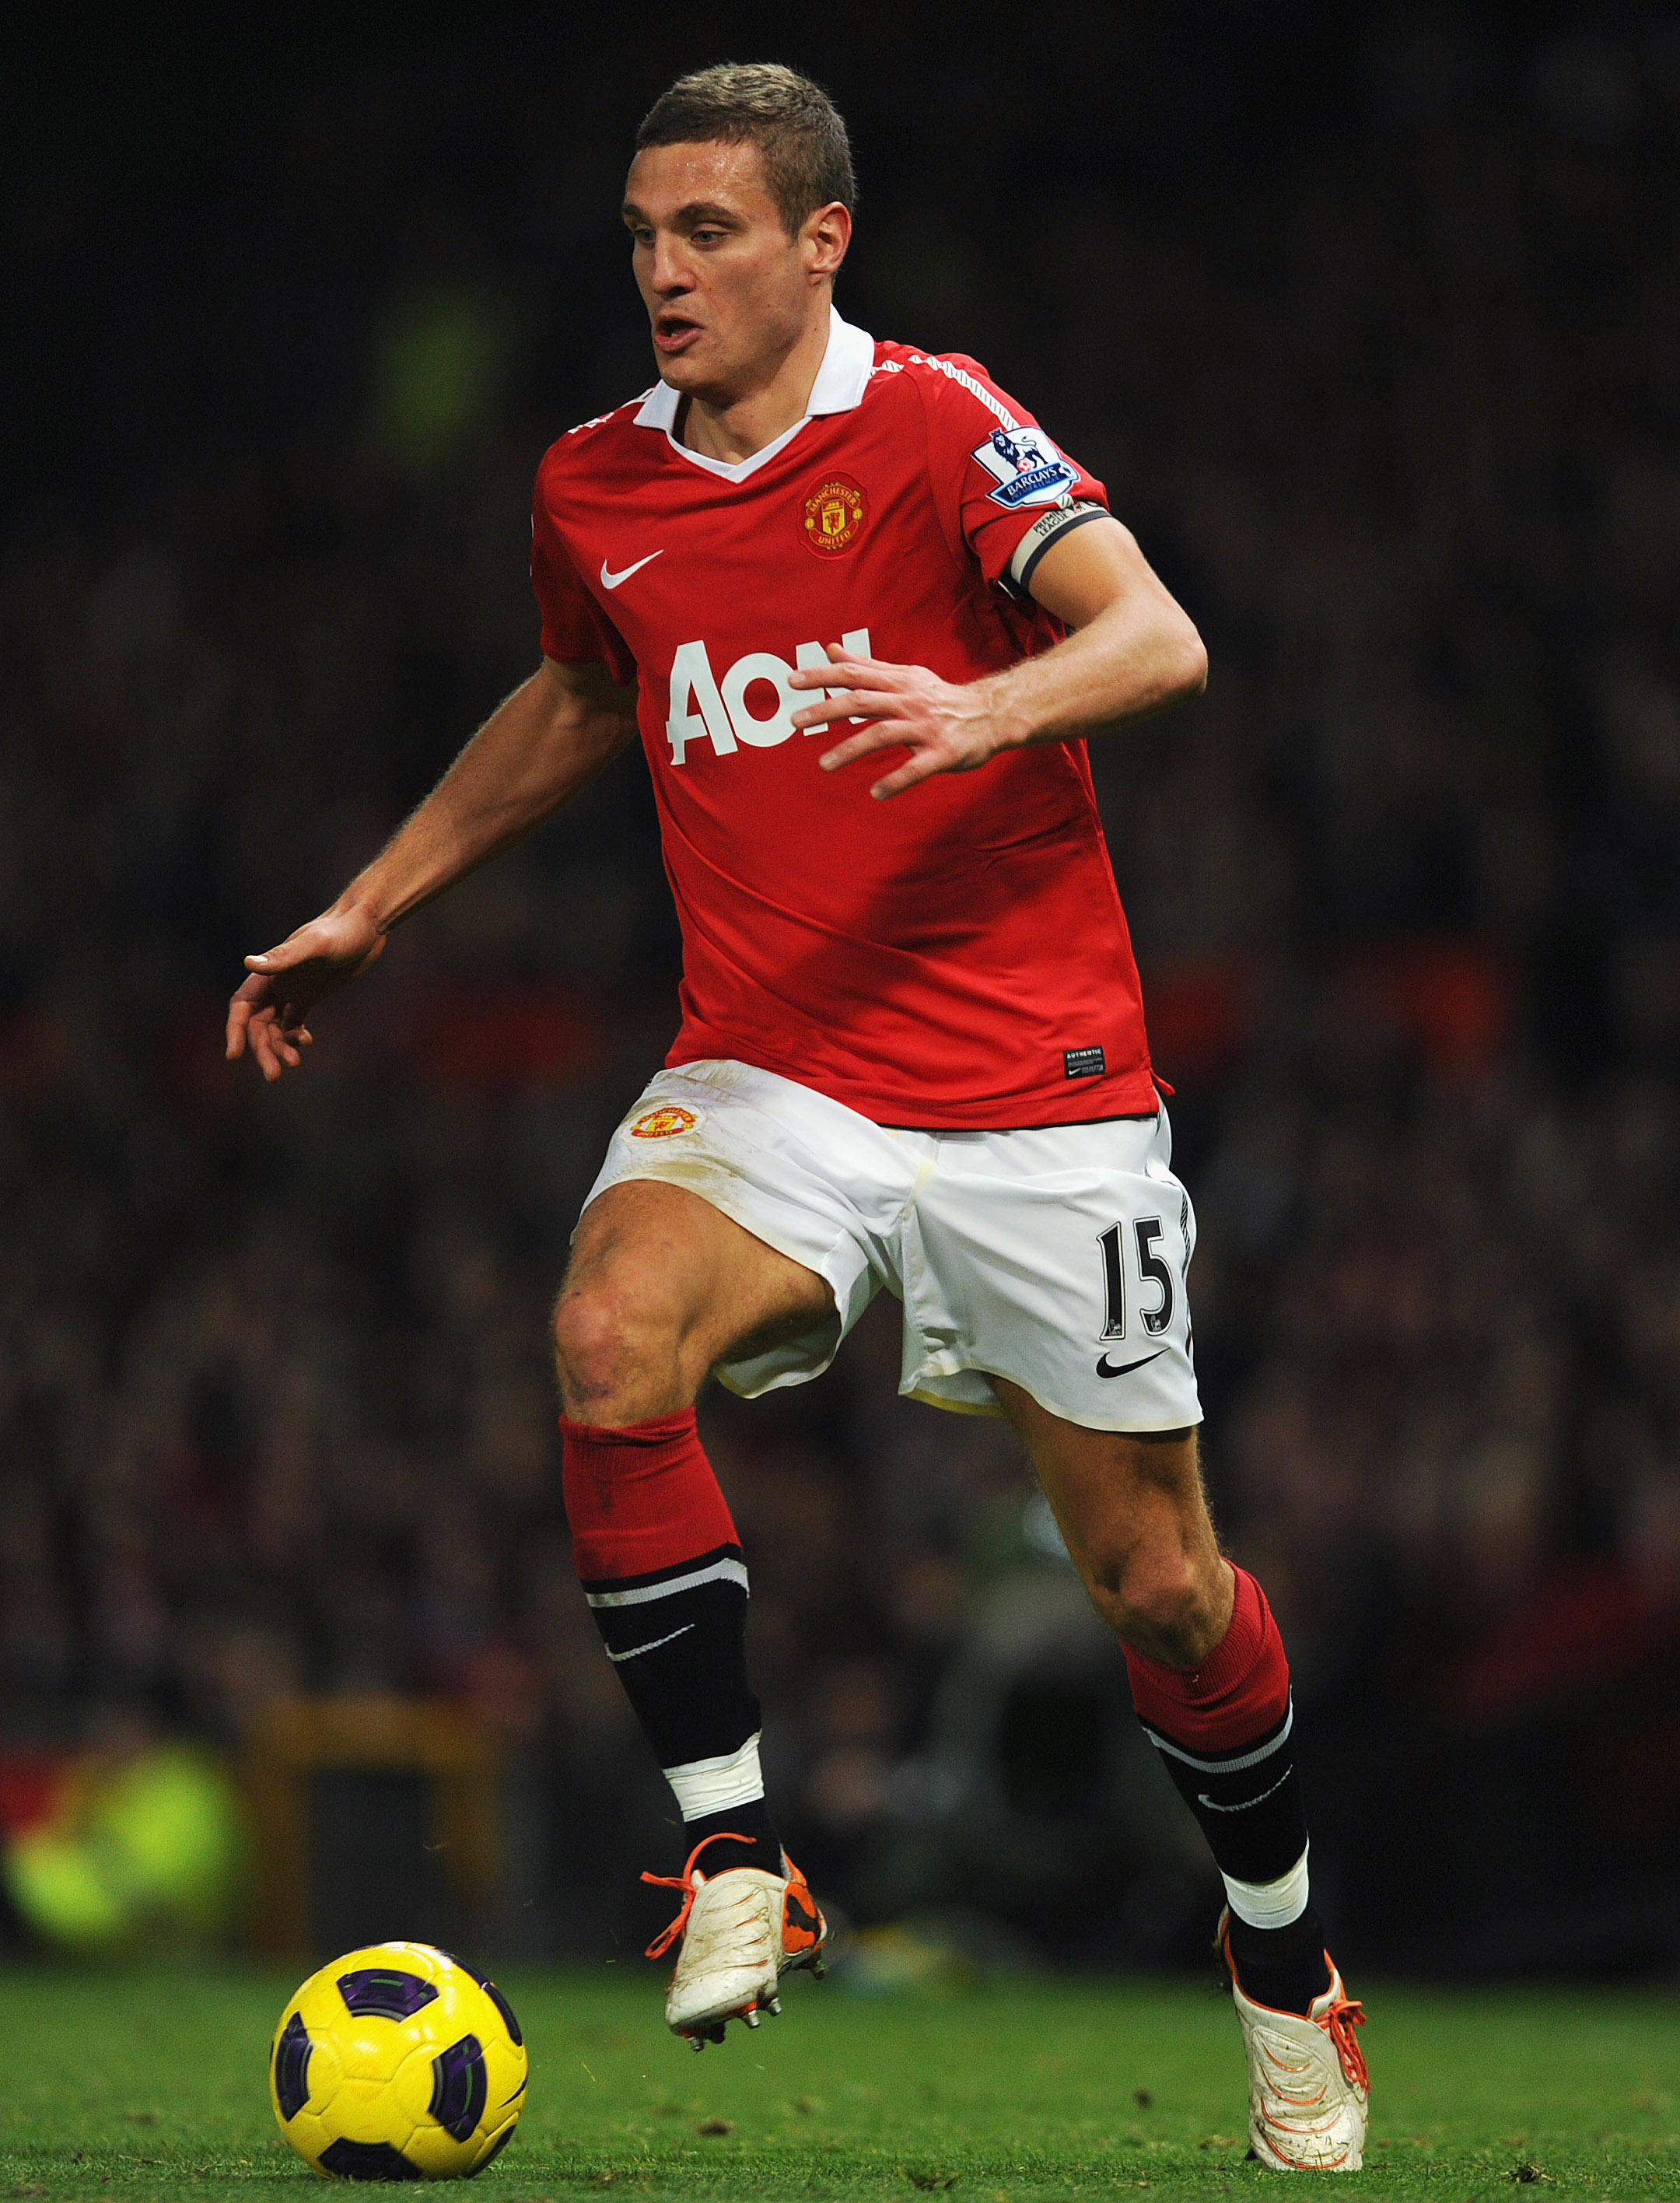 MANCHESTER, ENGLAND - NOVEMBER 20: Nemanja Vidic of Manchester United plays the ball during the Barclays Premier League match between Manchester United and Wigan Athletic at Old Trafford on November 20, 2010 in Manchester, England.  (Photo by Michael Rega